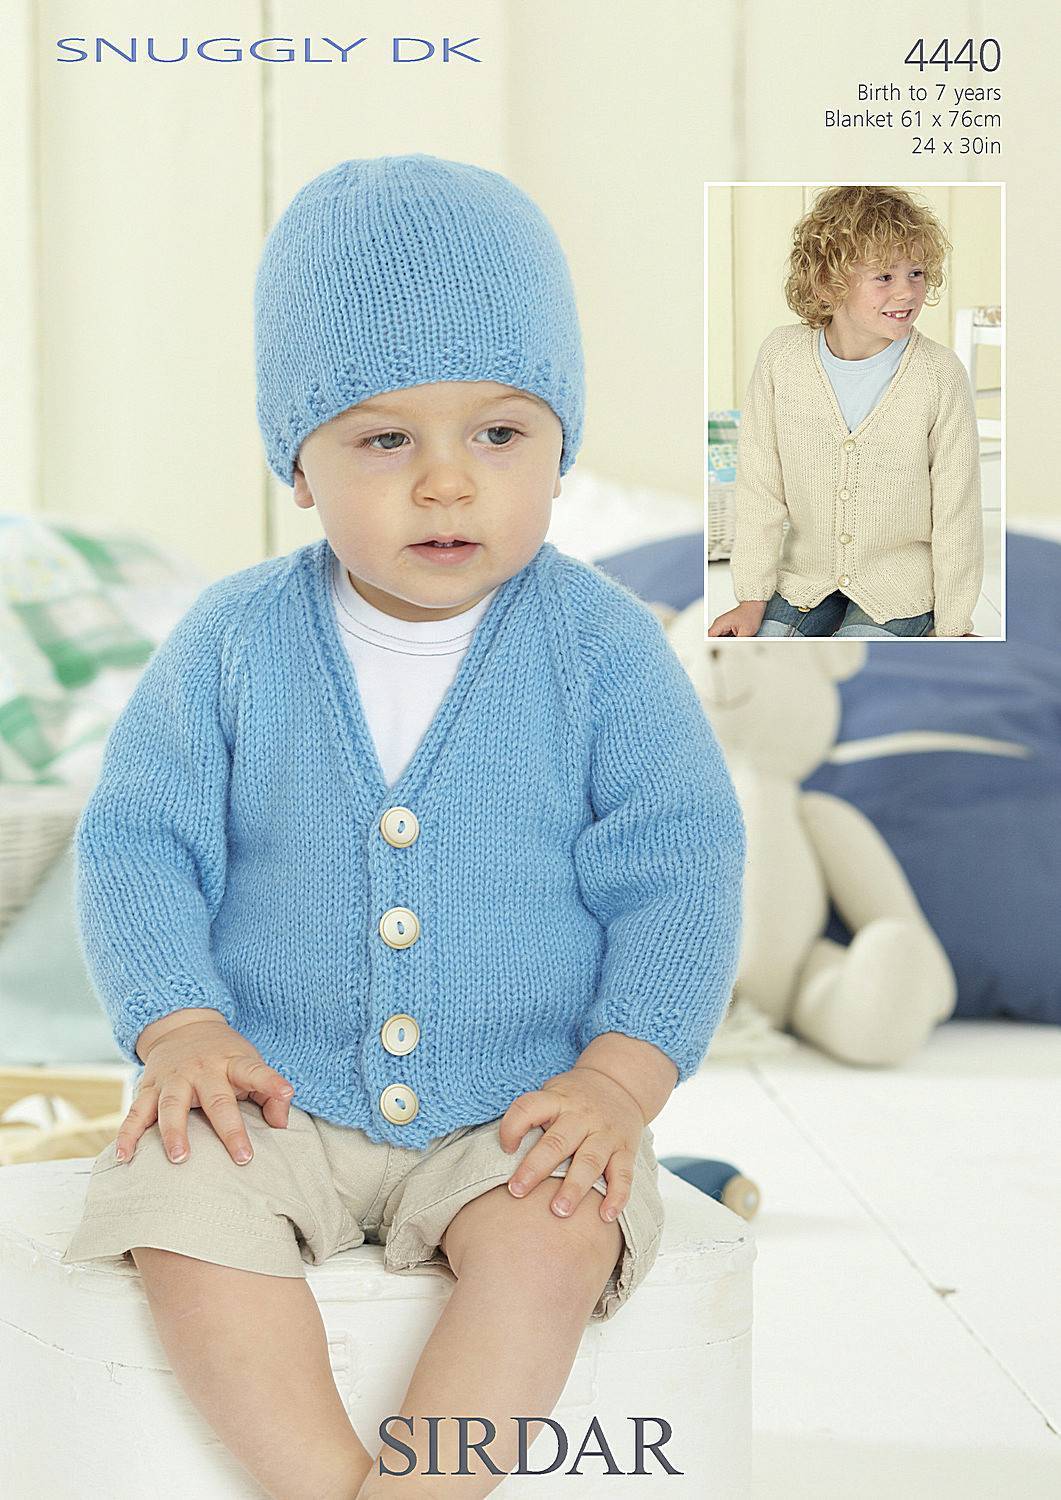 Boy's Cardigan, Hat and Blanket in Sirdar Snuggly DK (4440) | The ...